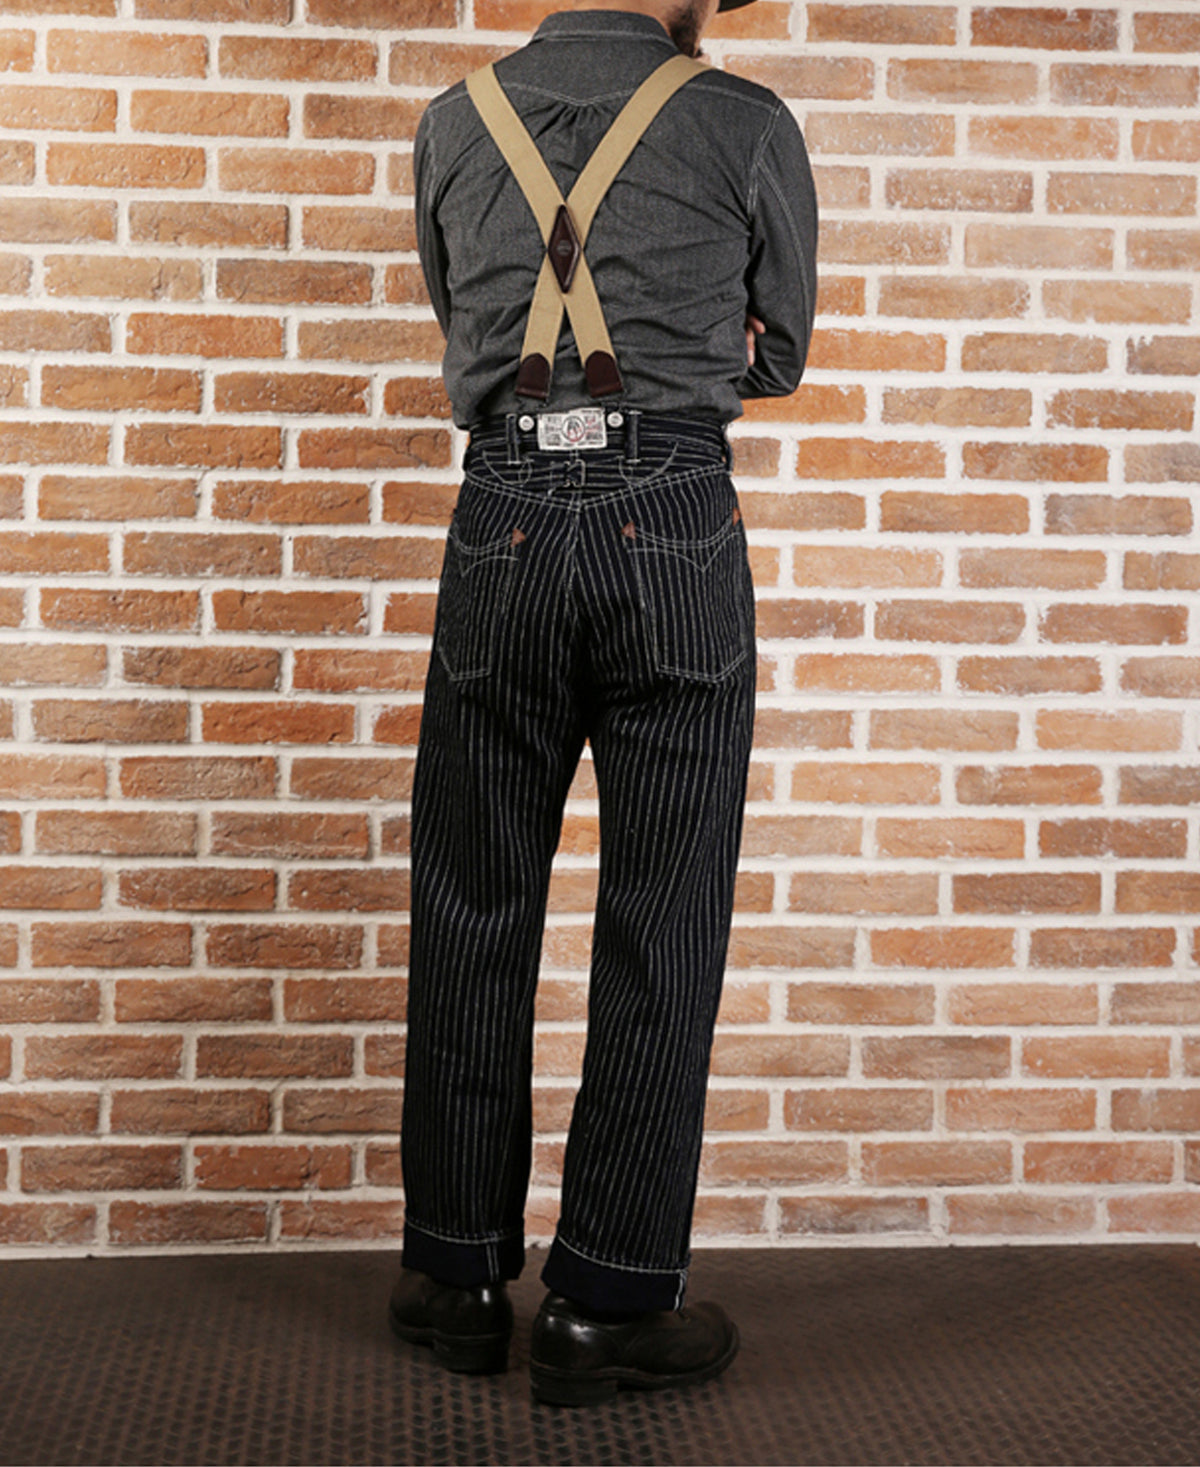 Old-Time X-Back Leather Button Suspender - Khaki